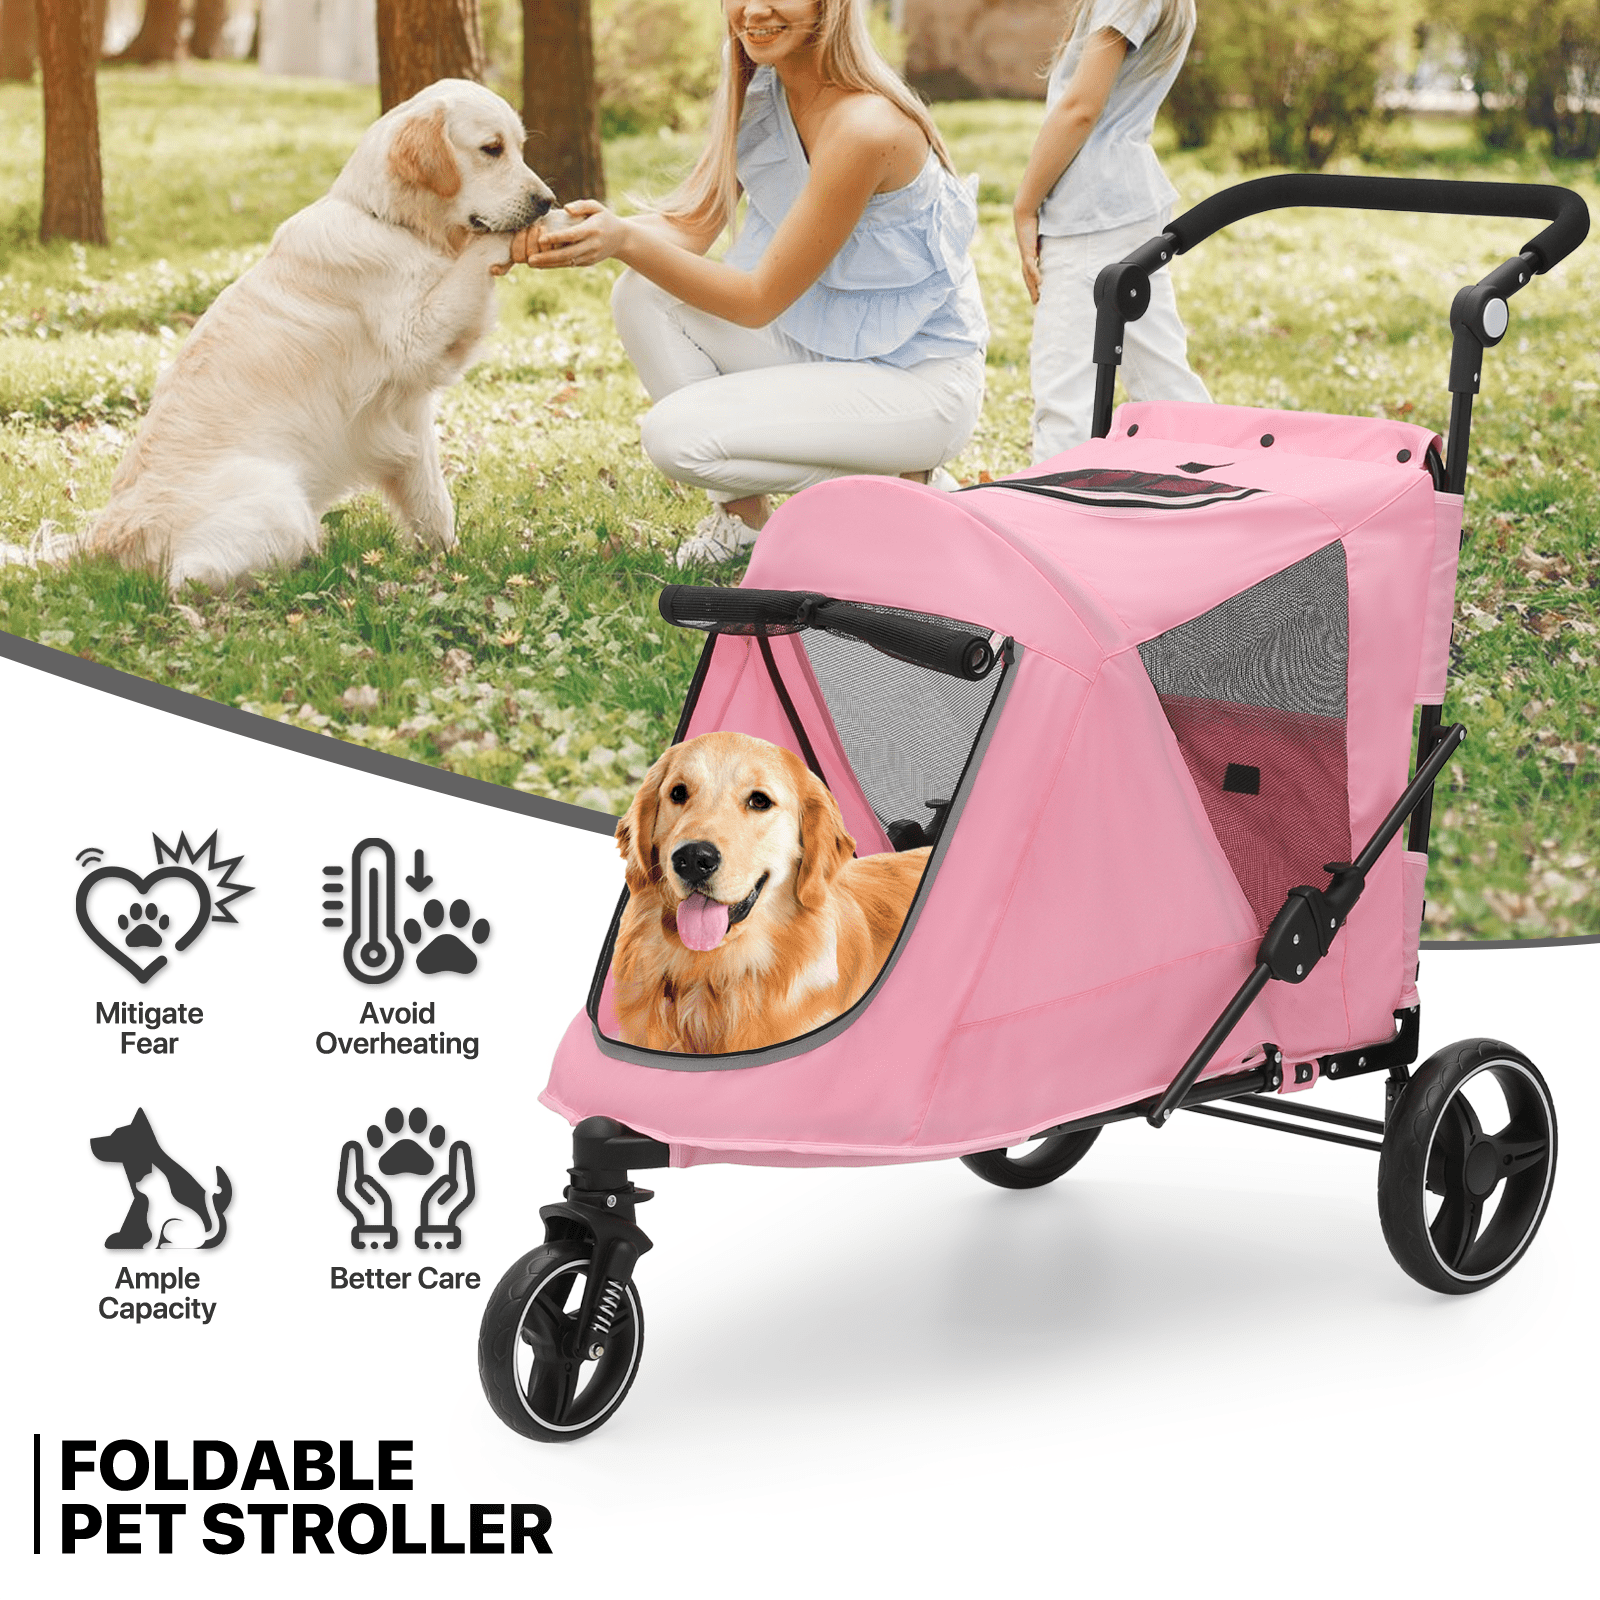 

Pet Stroller For Large Dogs Or Multiple Dogs Cats With Adjustable Handle, 3-wheels Dual Entry Portable Dog Carting Easy Folding Pet Wagon Double Dog Stroller